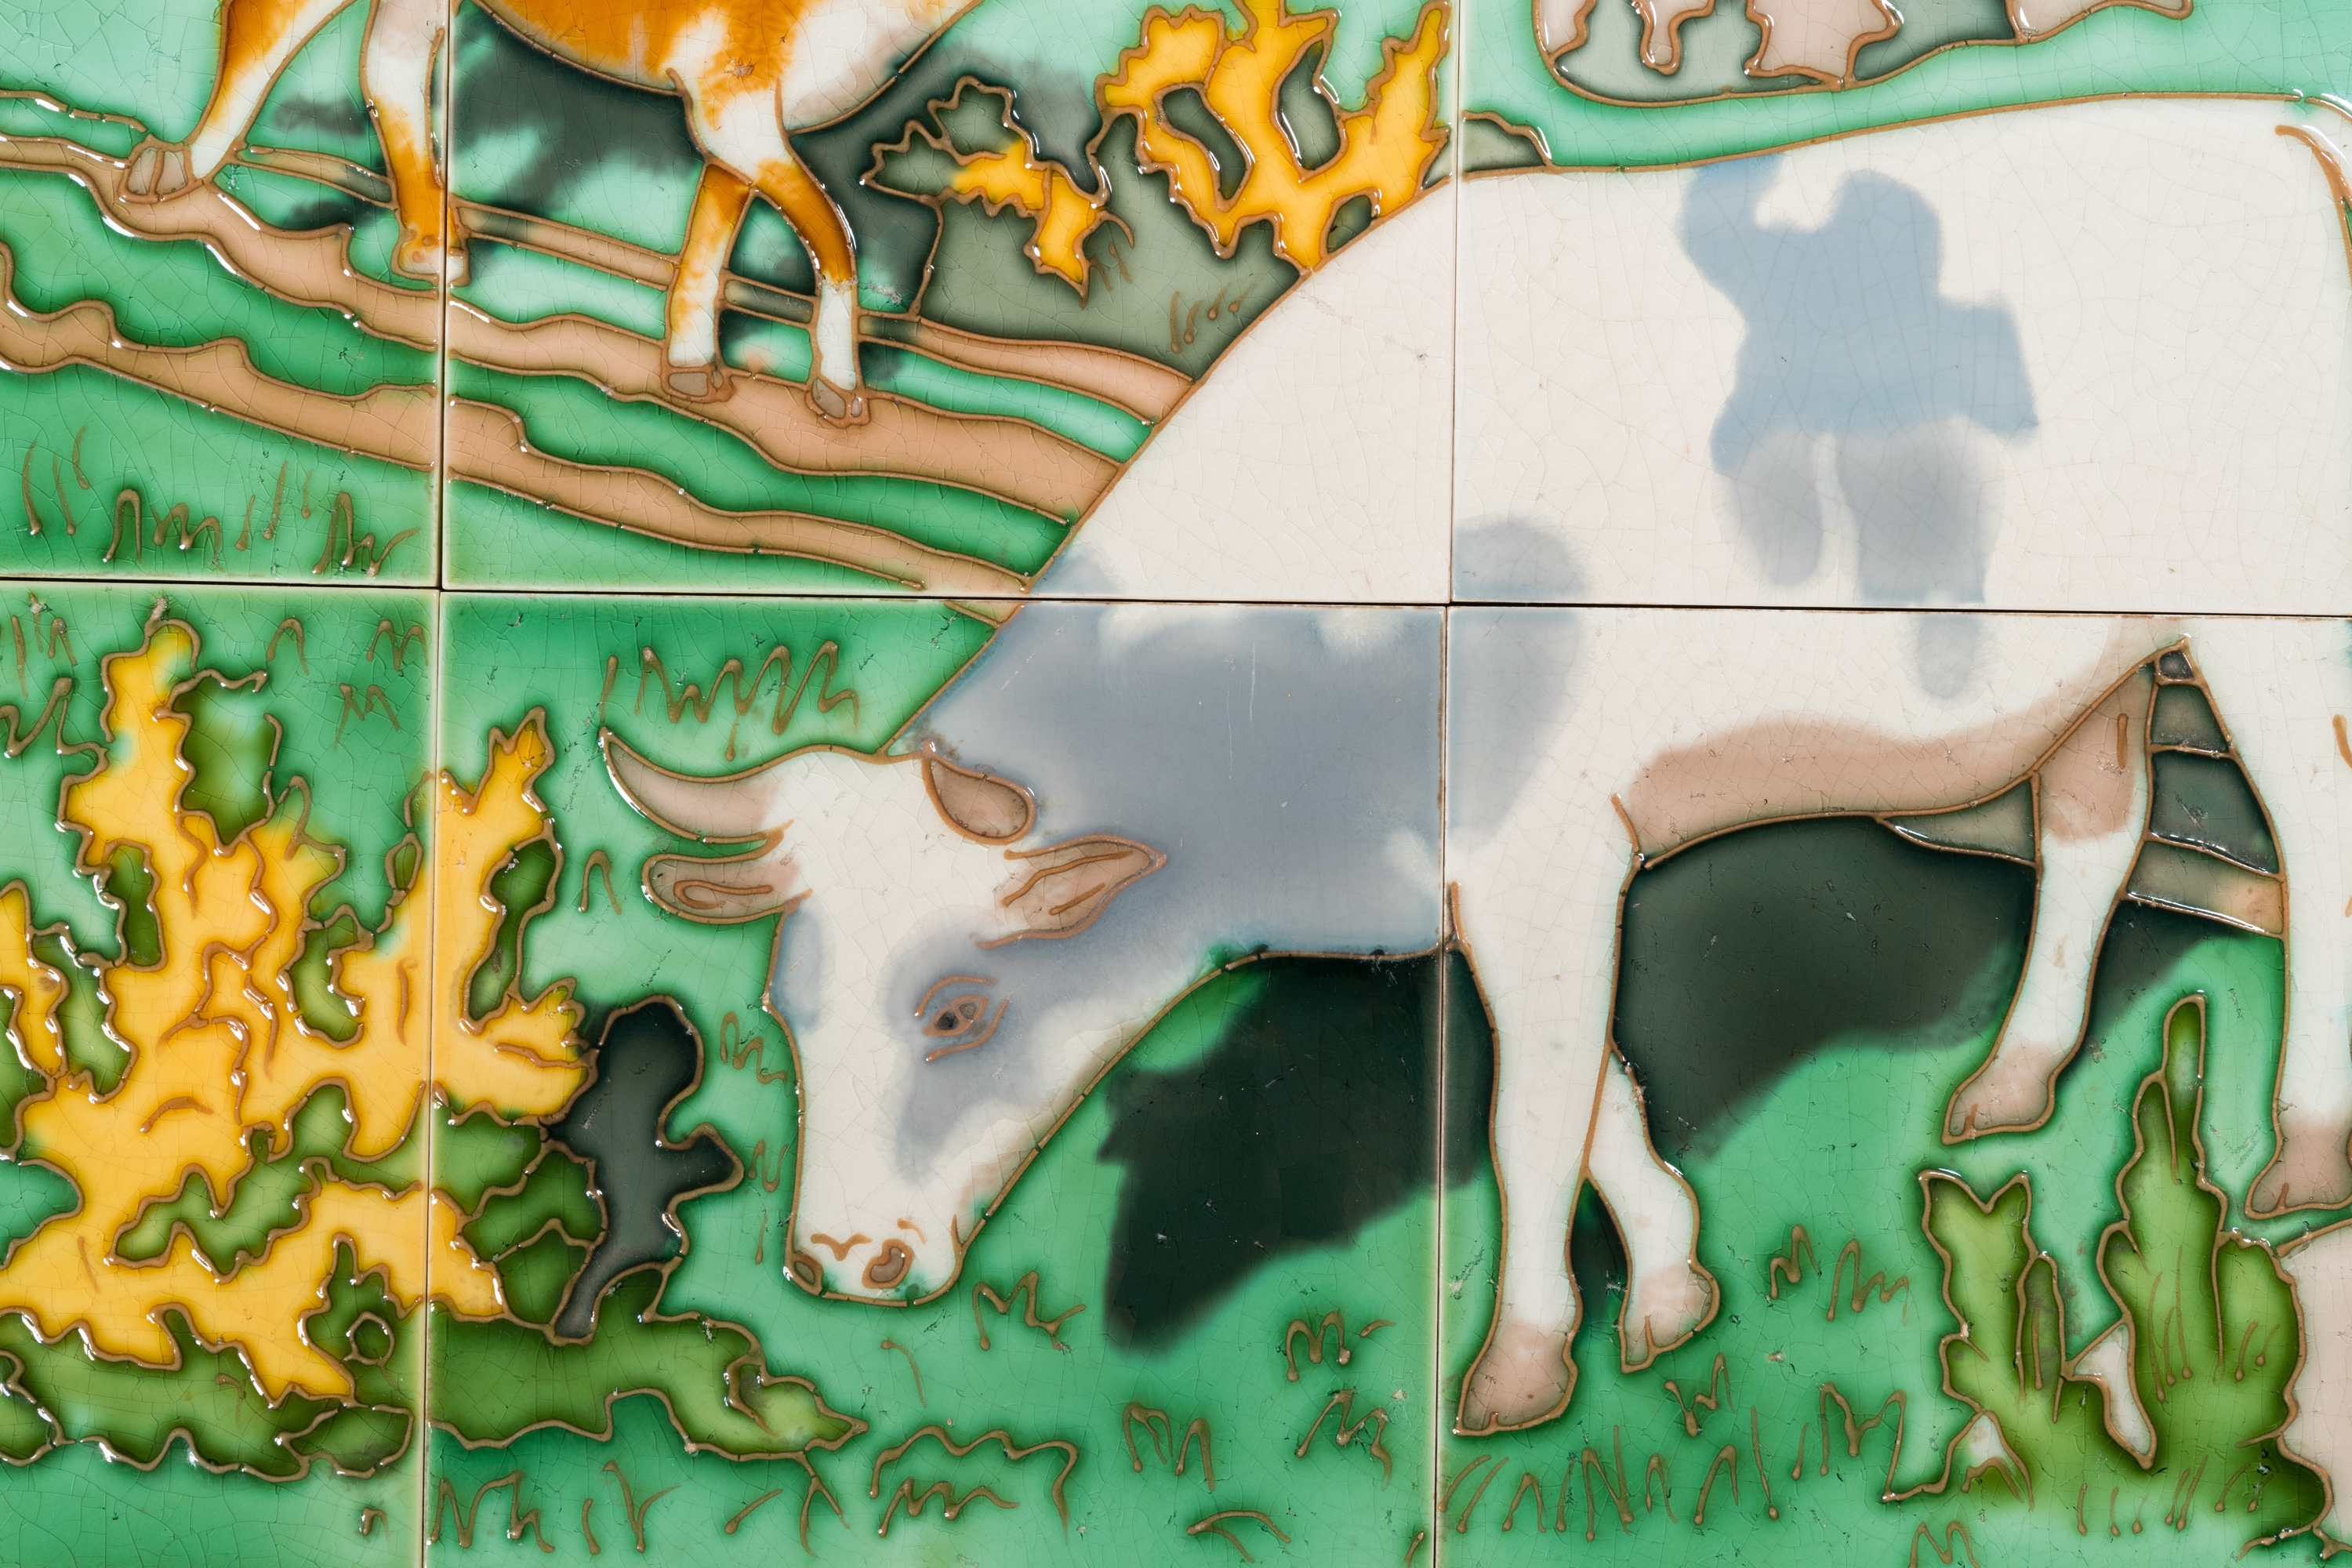 An Art Nouveau tile mural with a shepherdess and her cows in a meadow, Gilliot & Cie., Hemiksem - Image 3 of 4